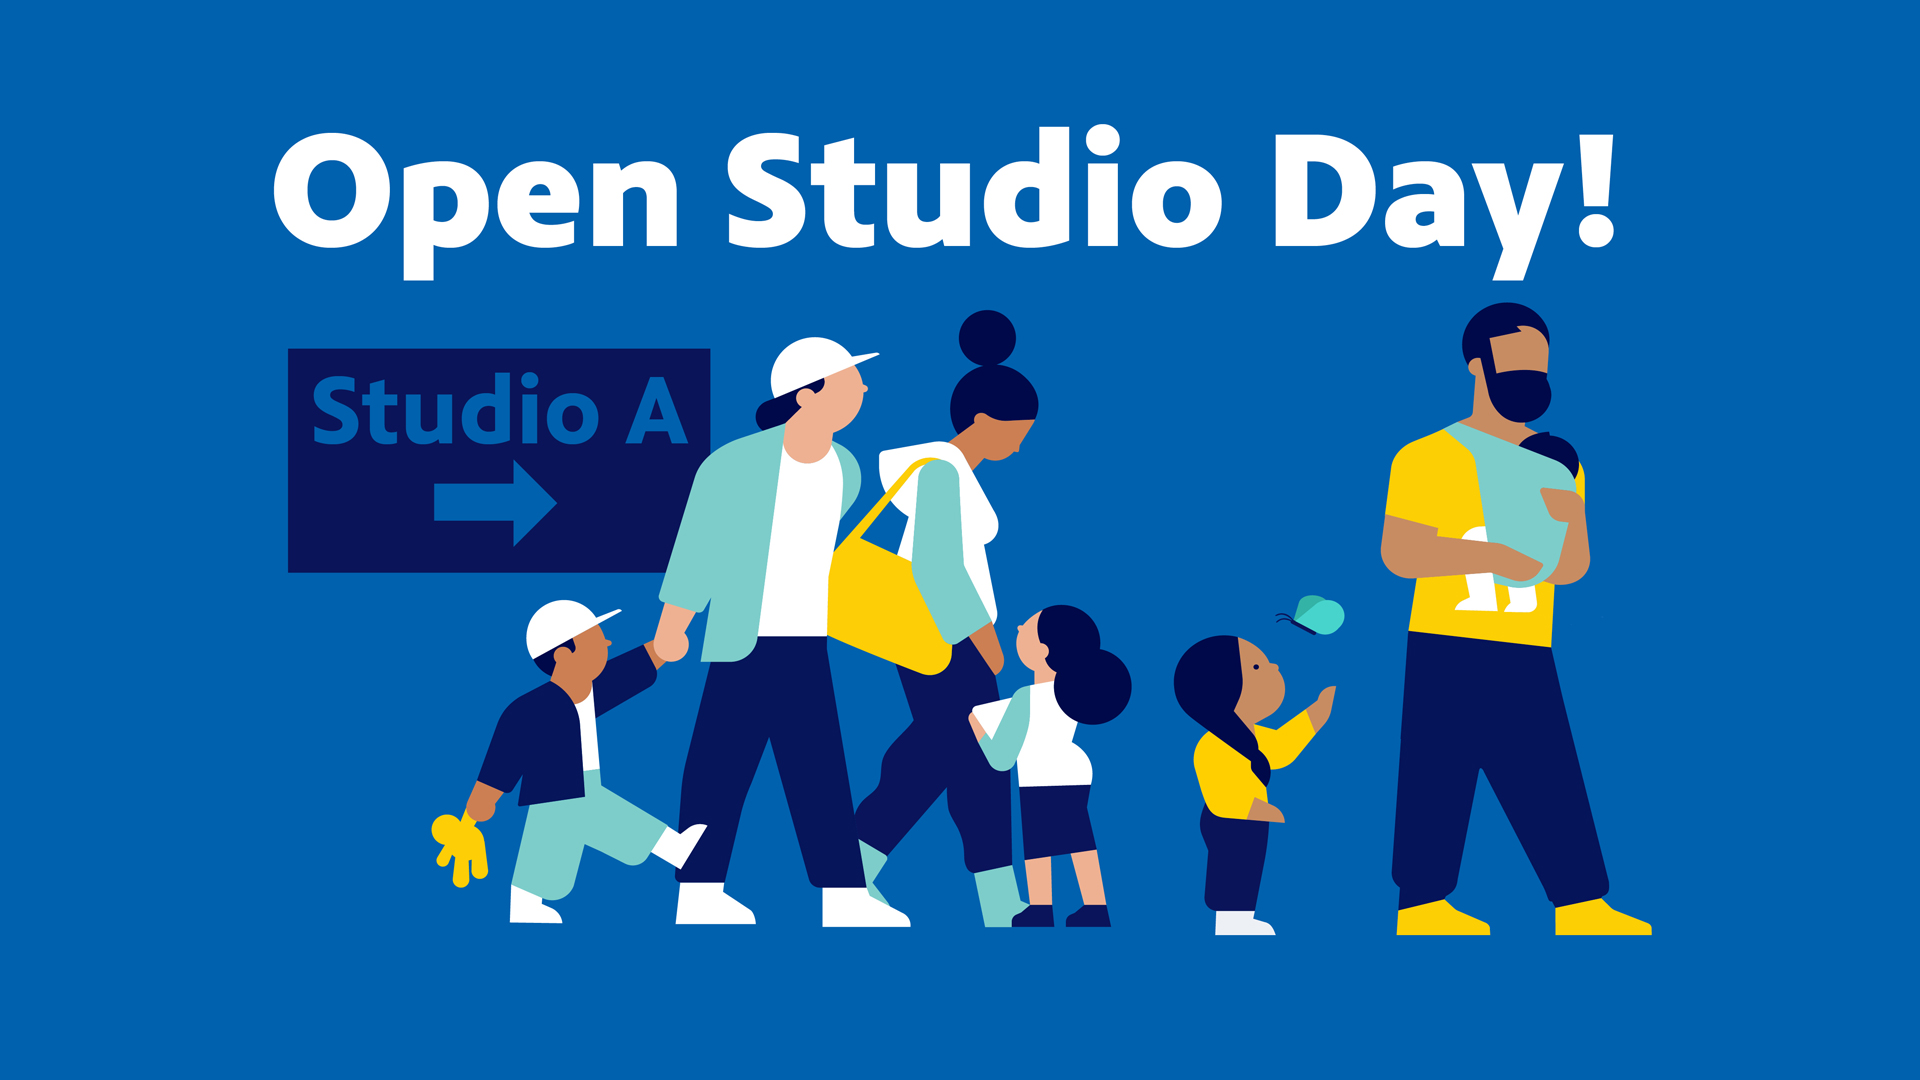 "Open Studio Day!" above a playful illustration of young, diverse families following a sign that reads "Studio A."